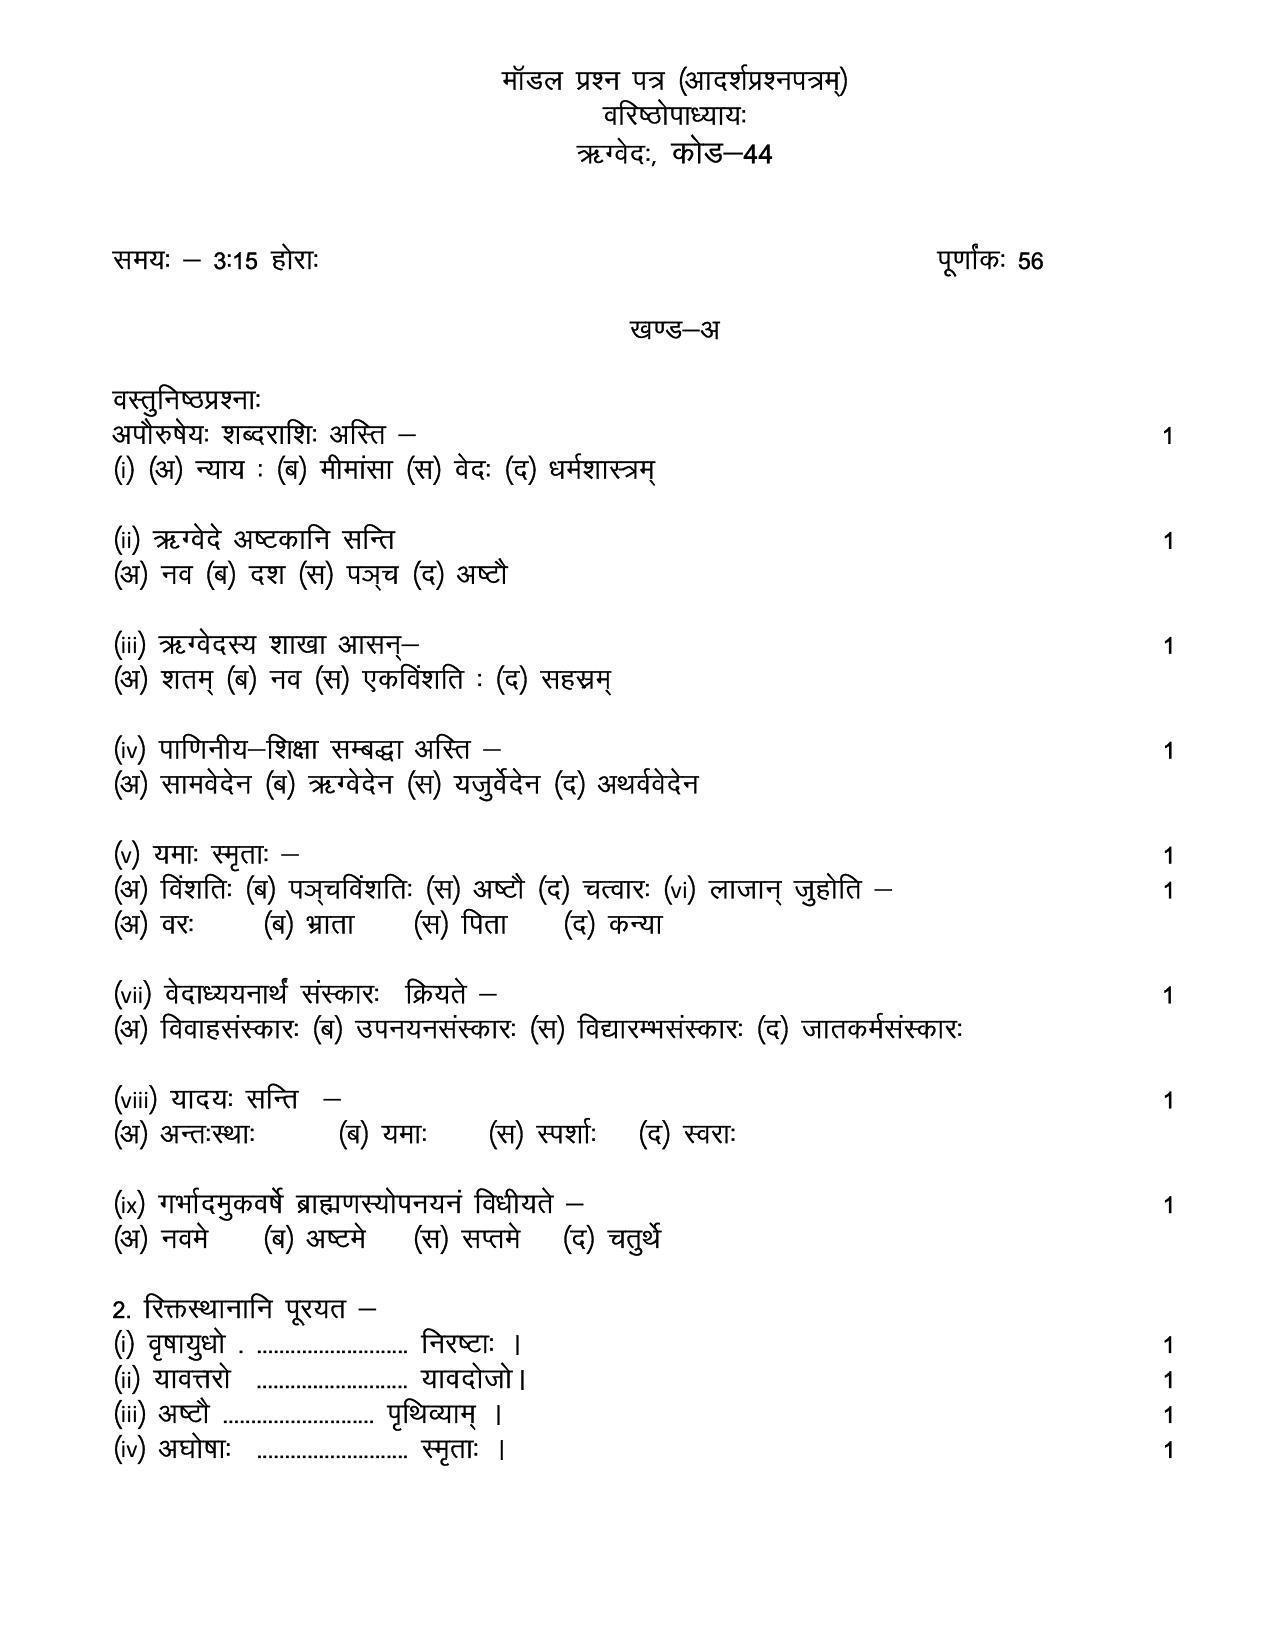 RBSE 2023 CLASS 12 RIGVED Paper - Page 6